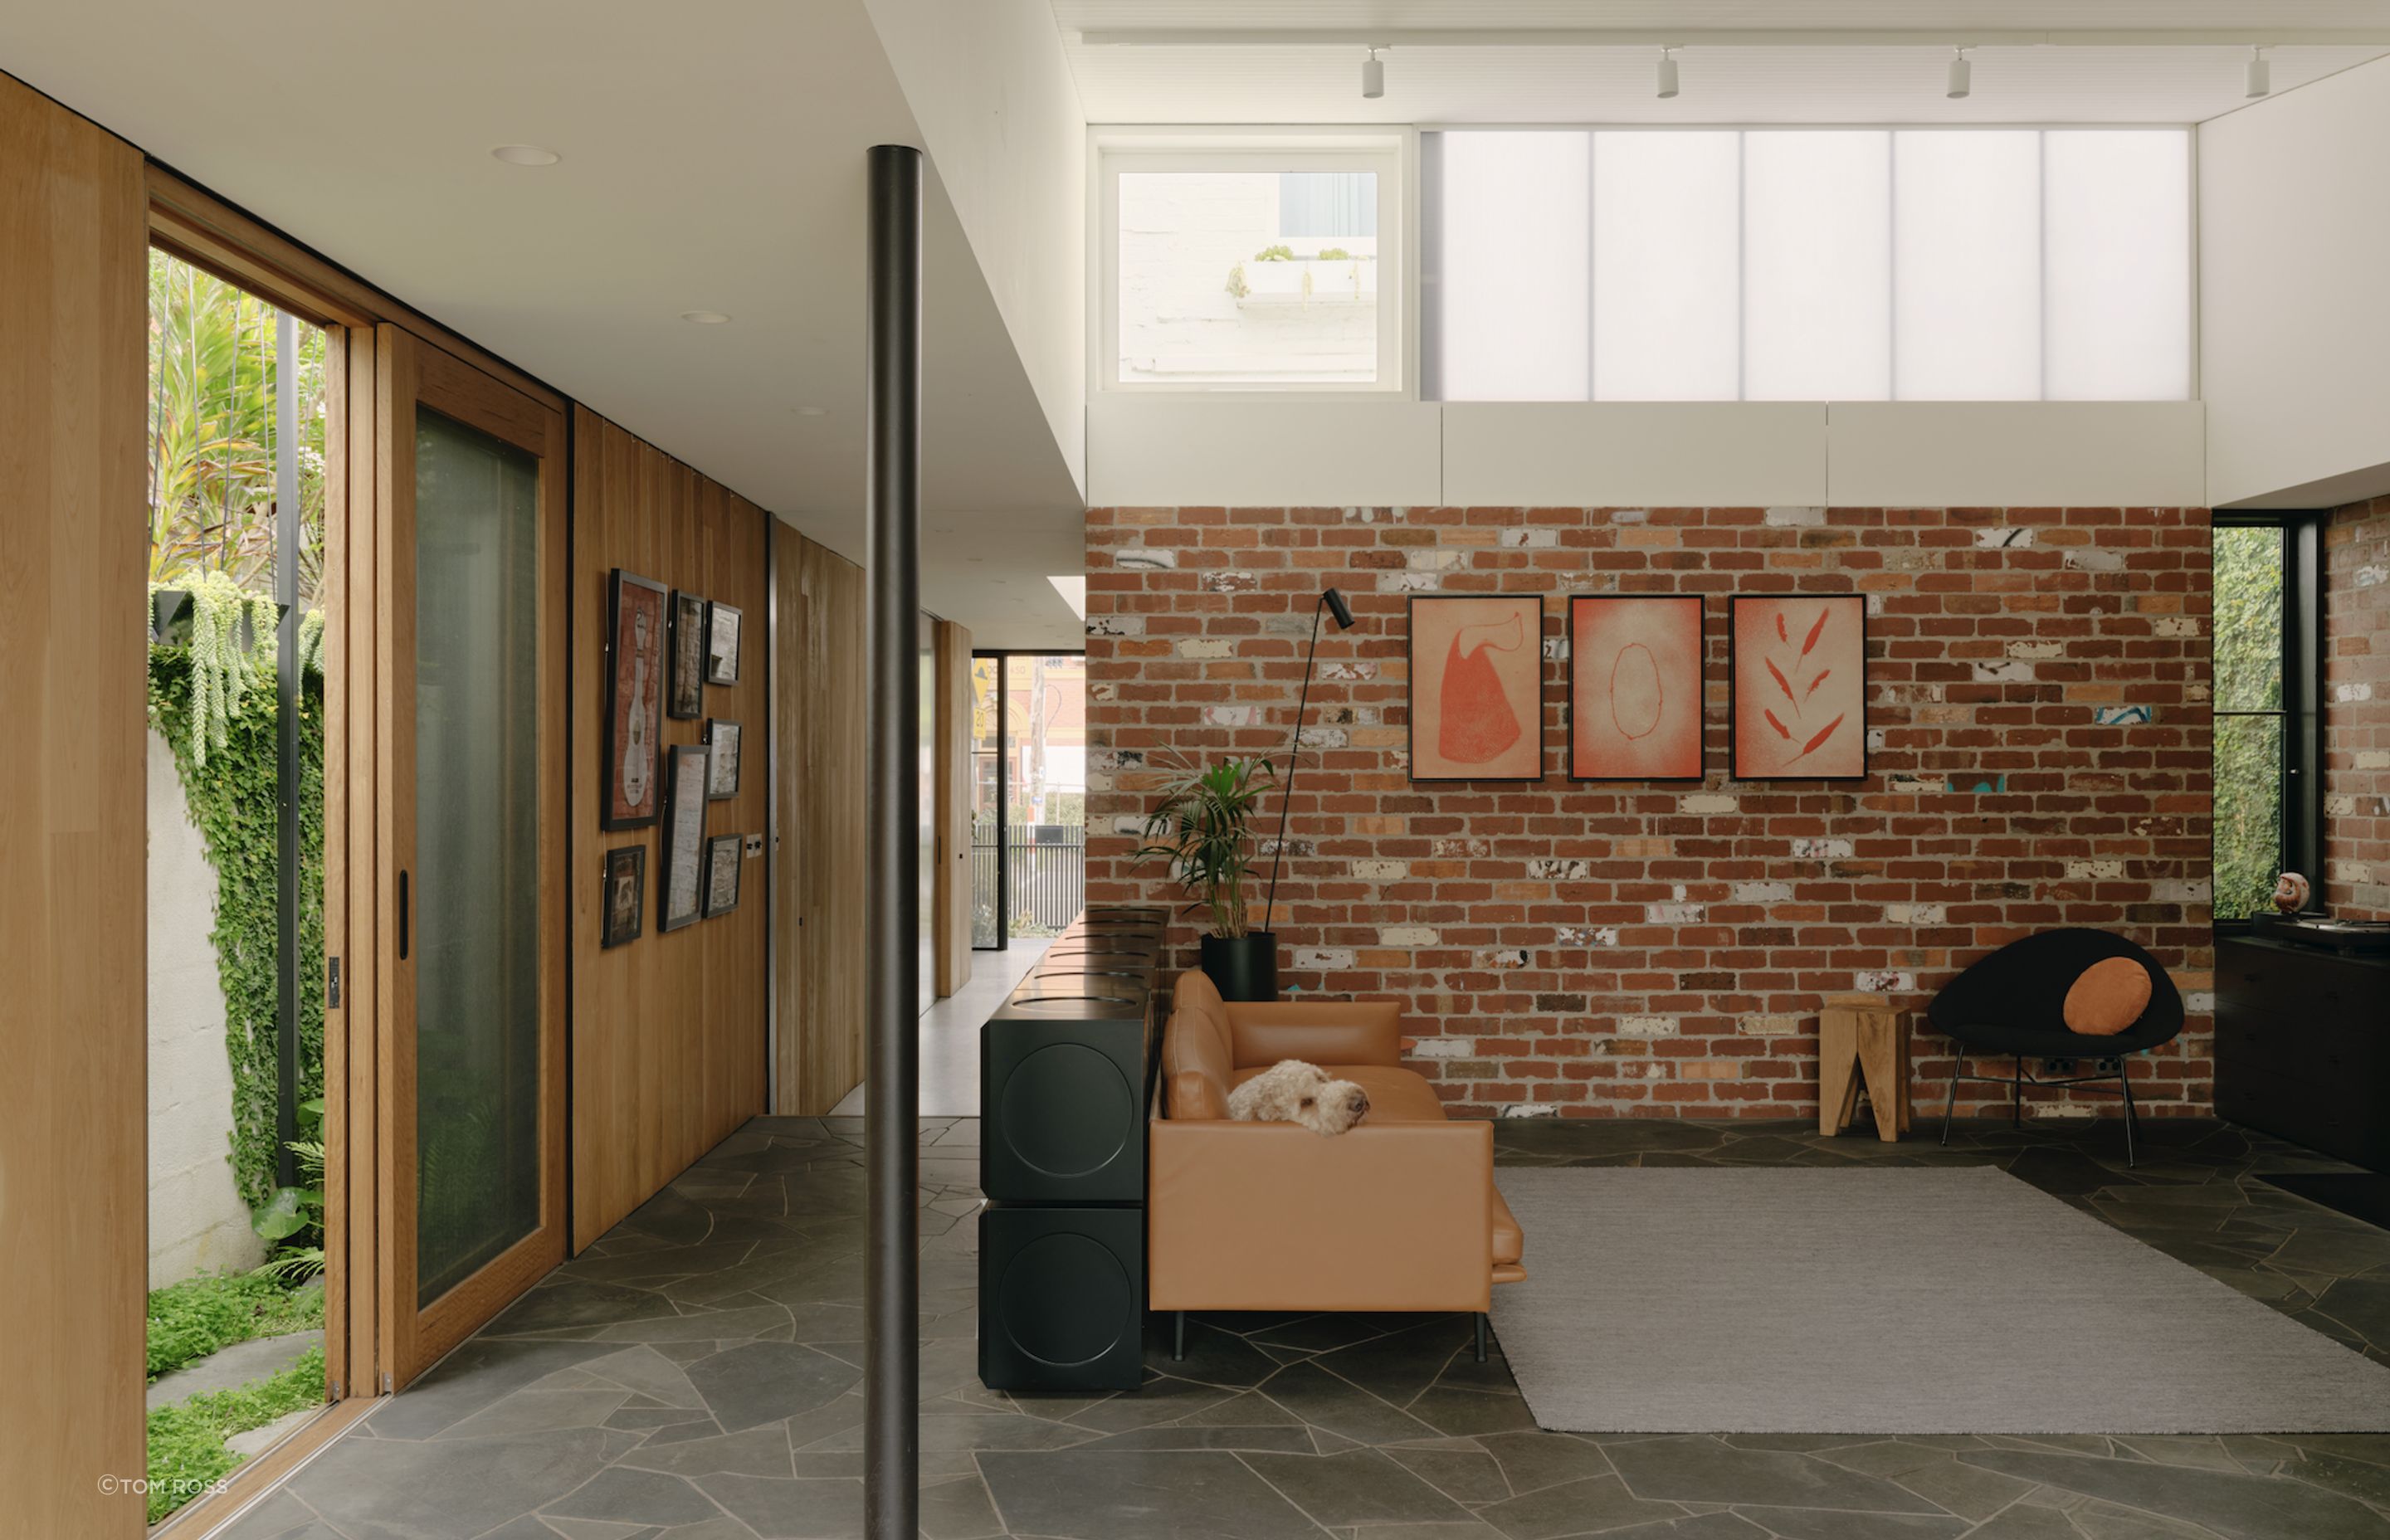 Fitzroy Laneway House's design prioritises a balance between relaxation and robustness.